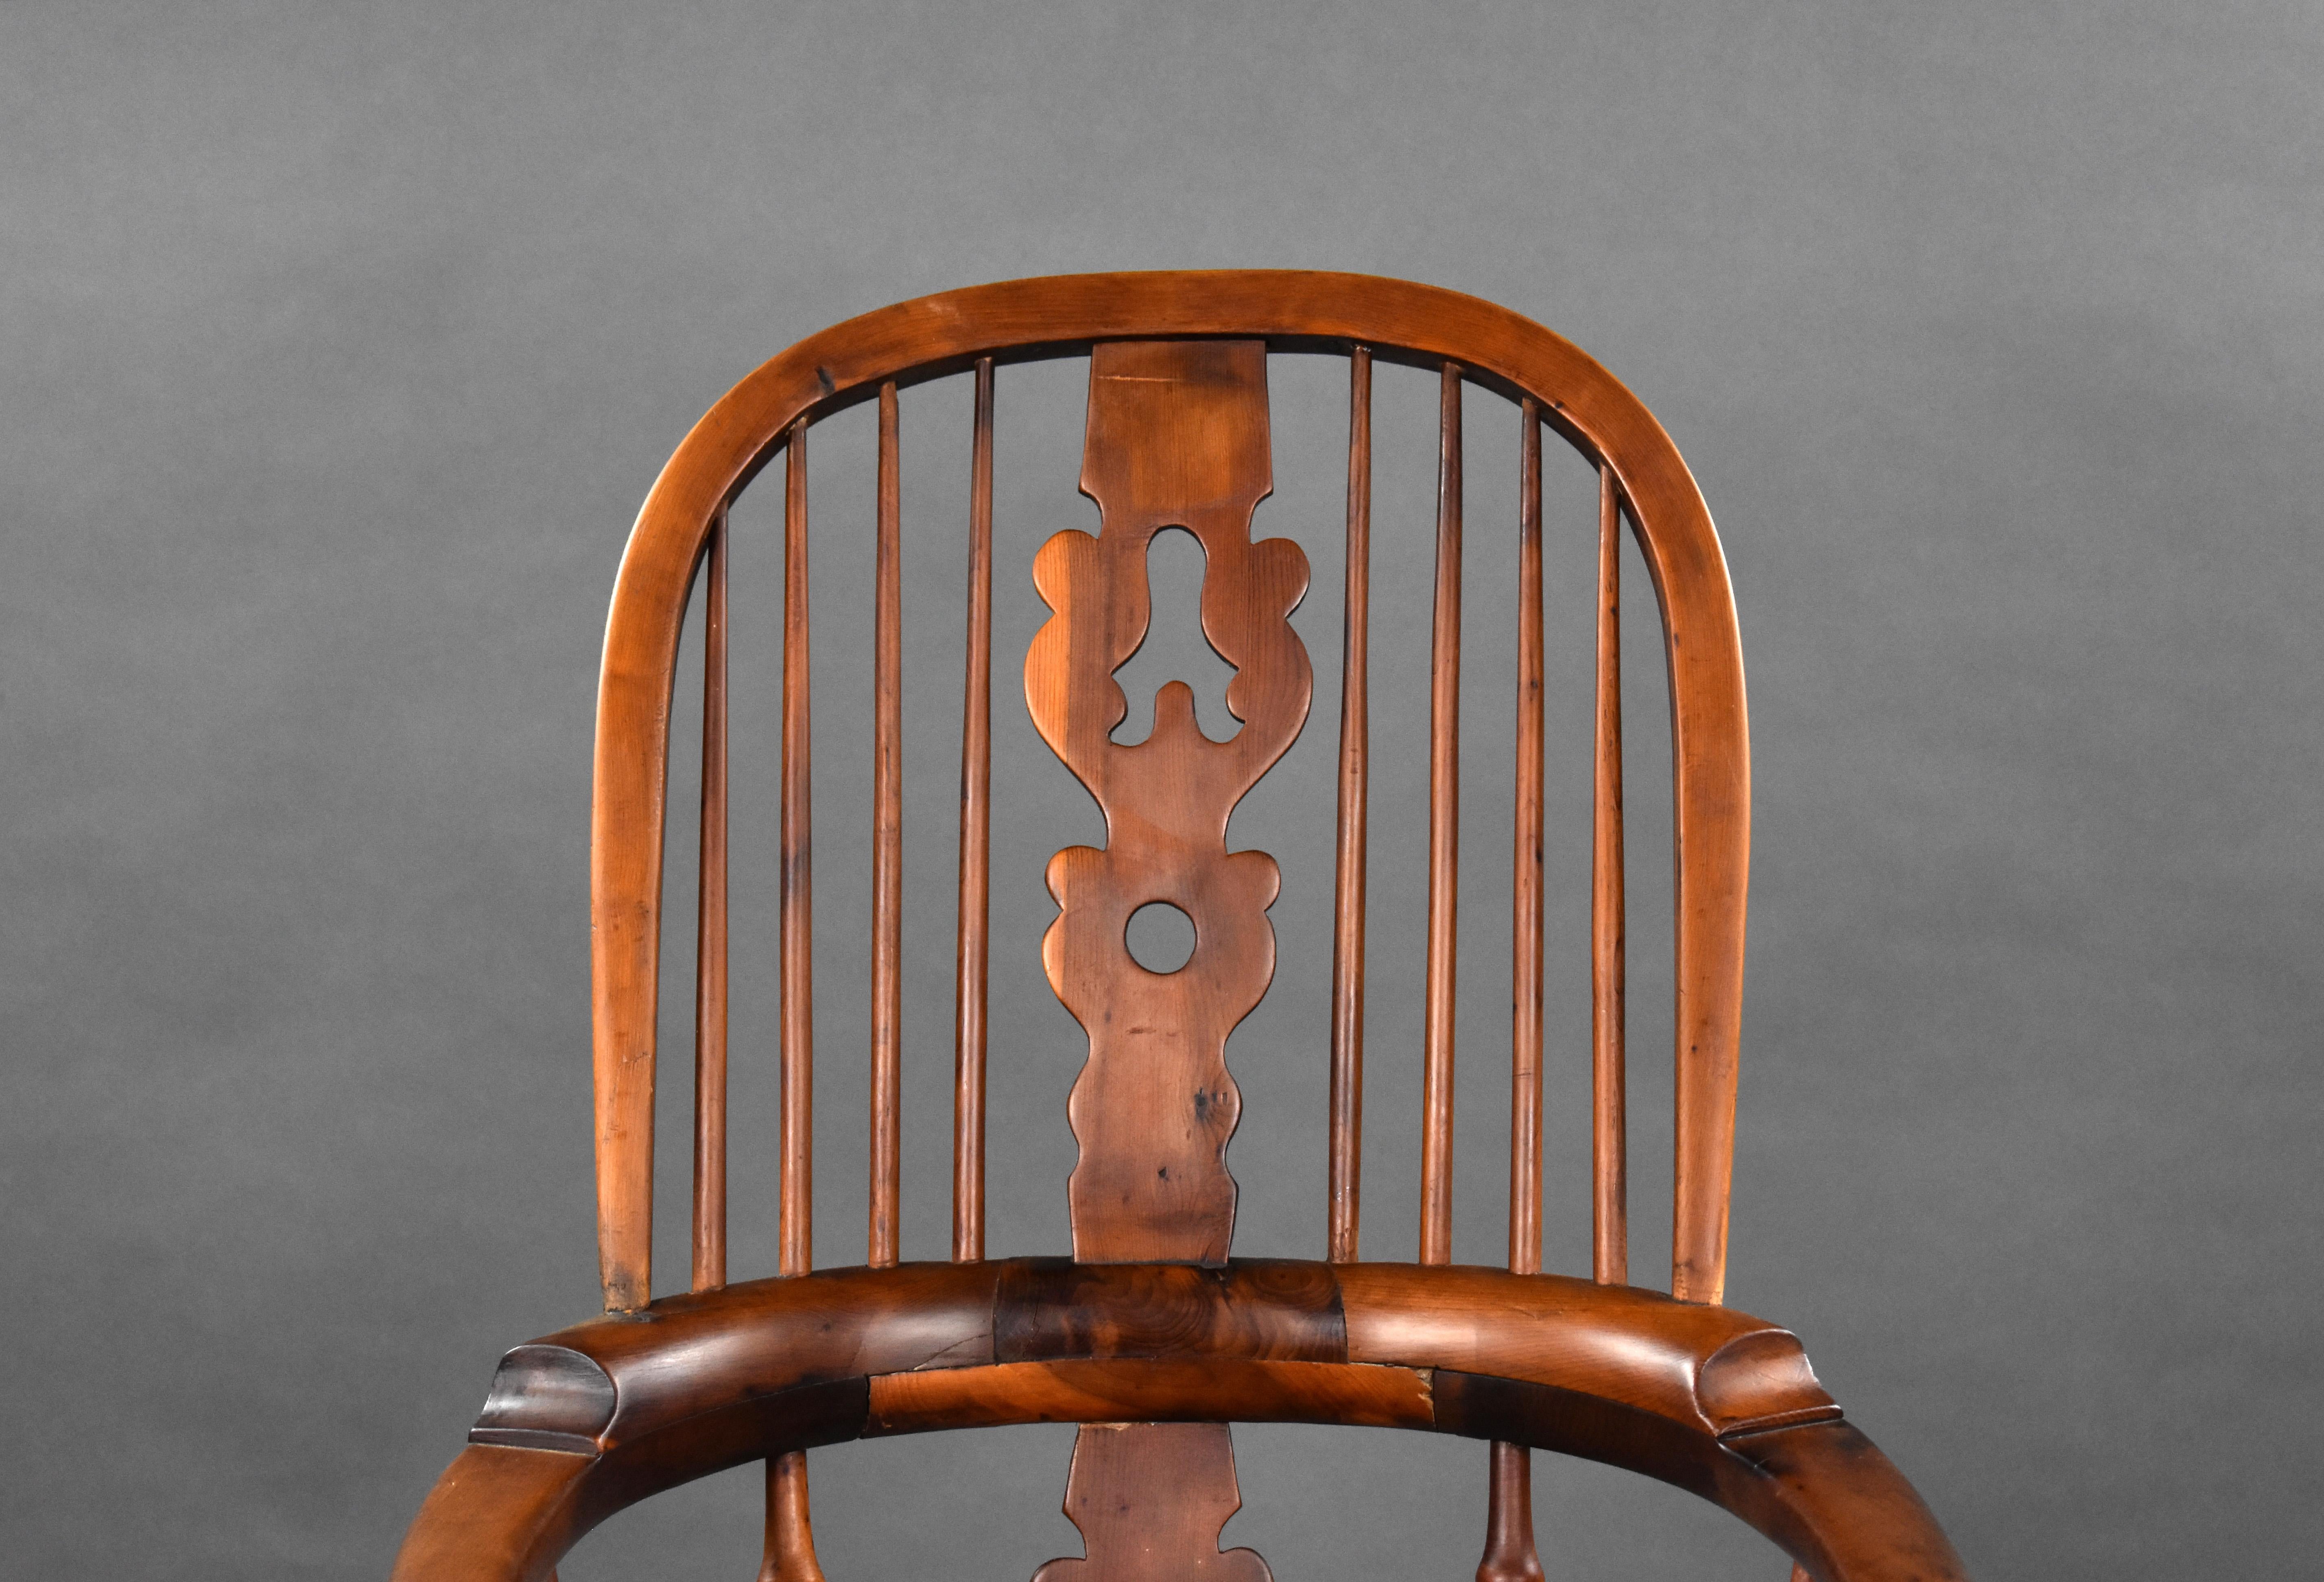 19th Century English Yew Wood High Back Broad Arm Windsor Chair For Sale 2